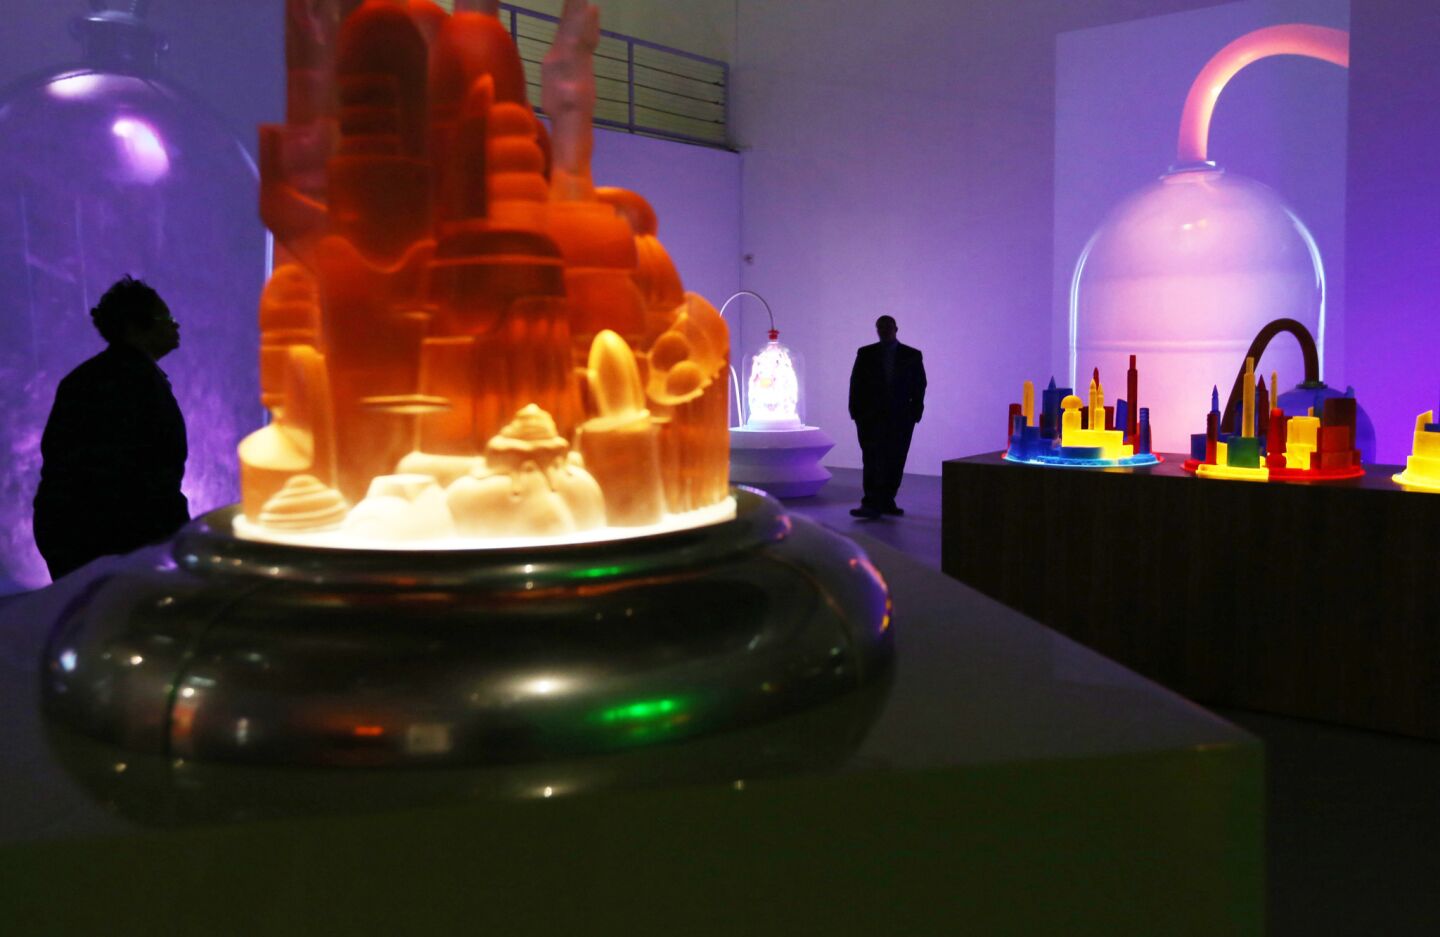 A group of sculptures from Mike Kelley's "Kandor" series, along with video projections, are on display in MOCA's Geffen Contemporary as part of a retrospective on the late L.A. artist's work.